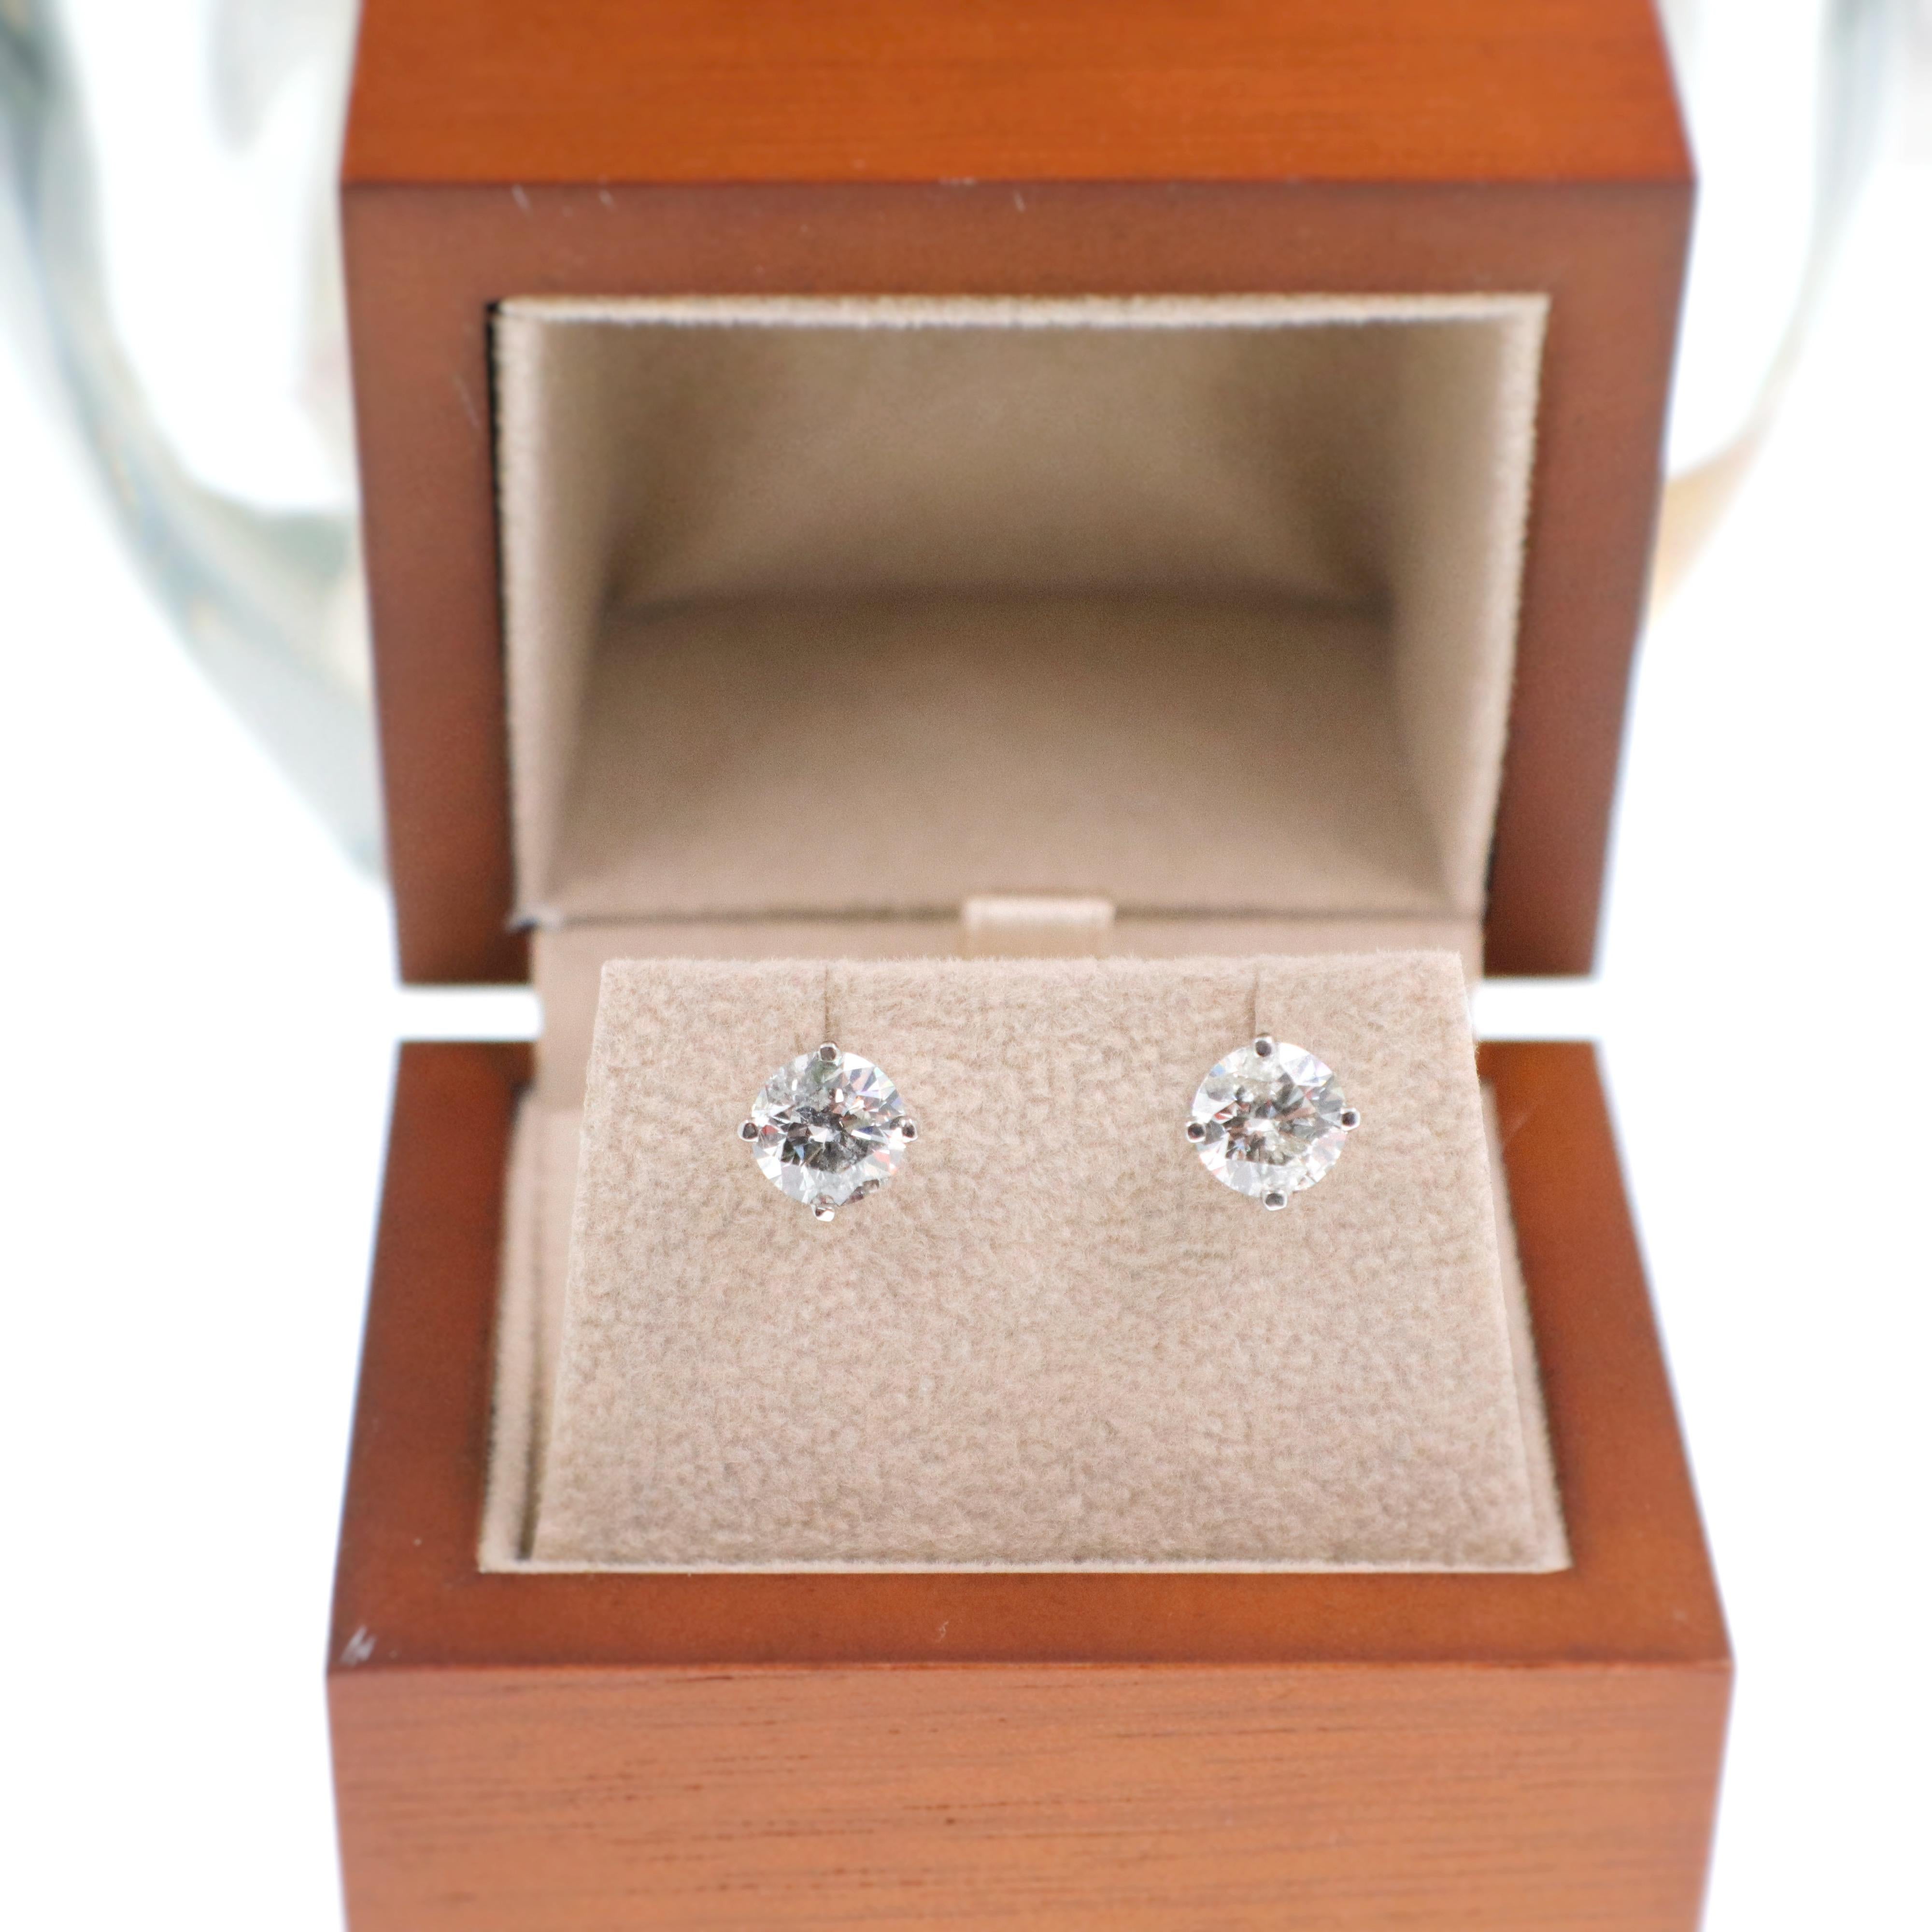 Diamond Earrings
Style:  Diamond Stud Earrings with Jumbo Friction Back Fastenings
Gold:  14K White Gold
TCW:  2.07 Carats Total
Diamond Shape:  Round Brilliant Cut
Color & Clarity:  H - I Color,  I1 Clarity
Hallmark:  14K
Includes:  Earring Box,